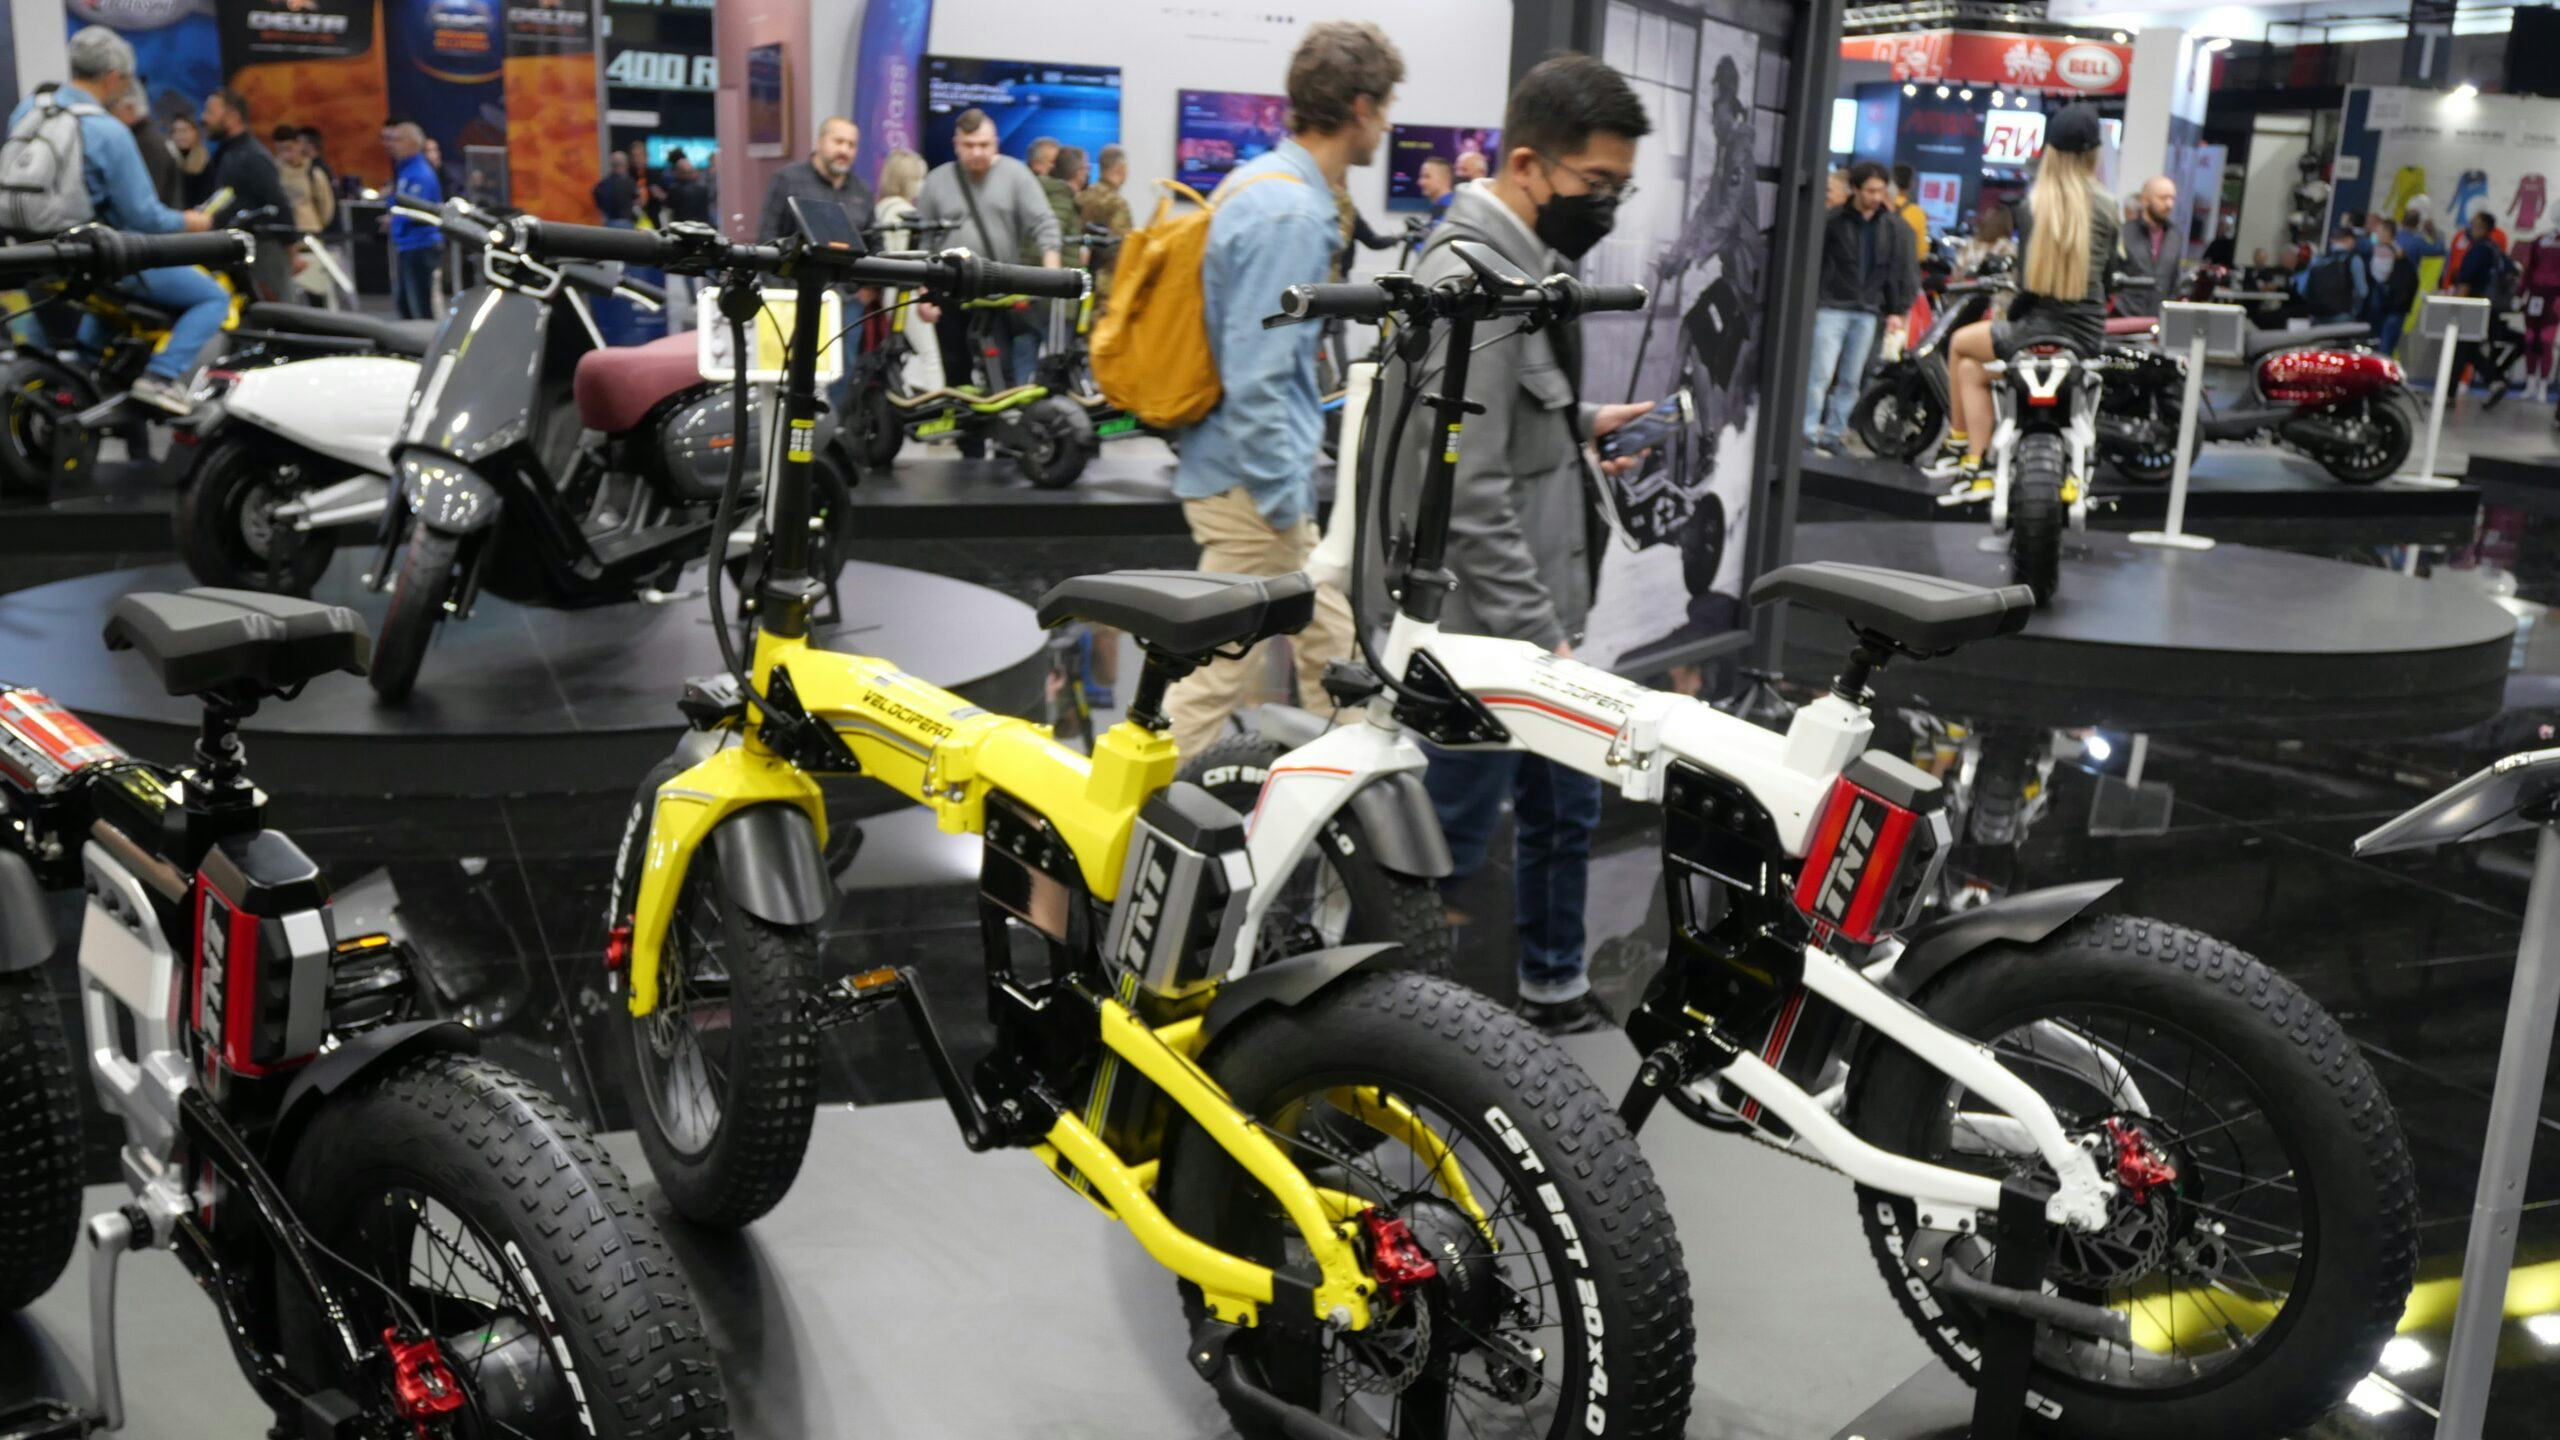 The motorbike industry has clearly embraced the promising market of e-bikes. – Photo Bike Europe